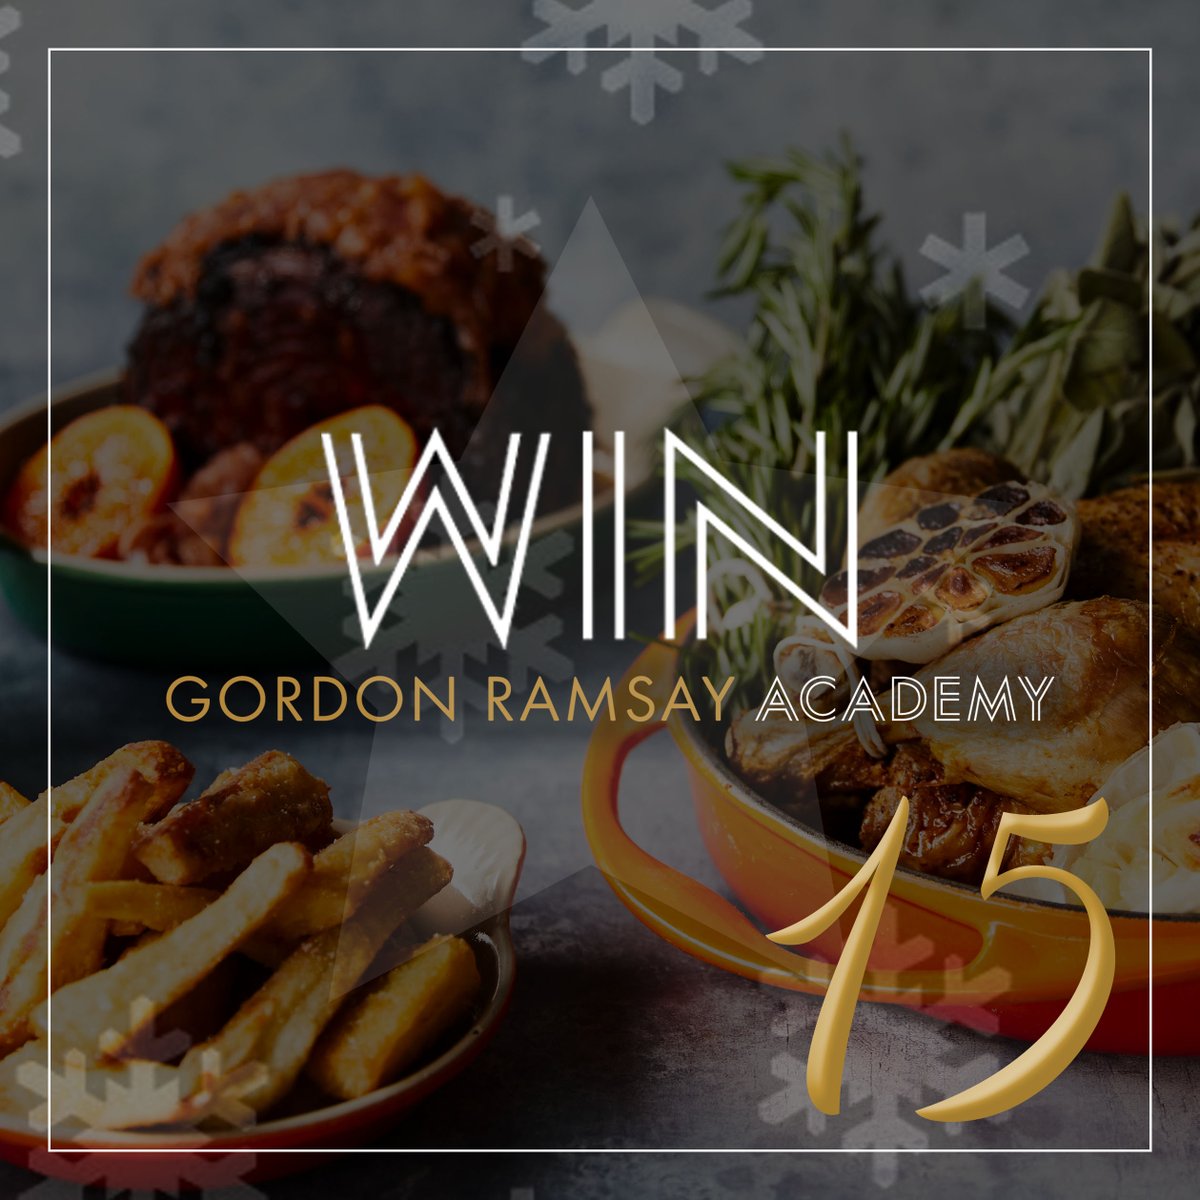 Our BIGGEST giveaway so far! 

We're giving you the chance to WIN £100 in Gordon Ramsay Academy gift vouchers! The vouchers can be used for any of our cooking classes, including online.

To enter, head over to our Instagram! https://t.co/2w8hvc6orn